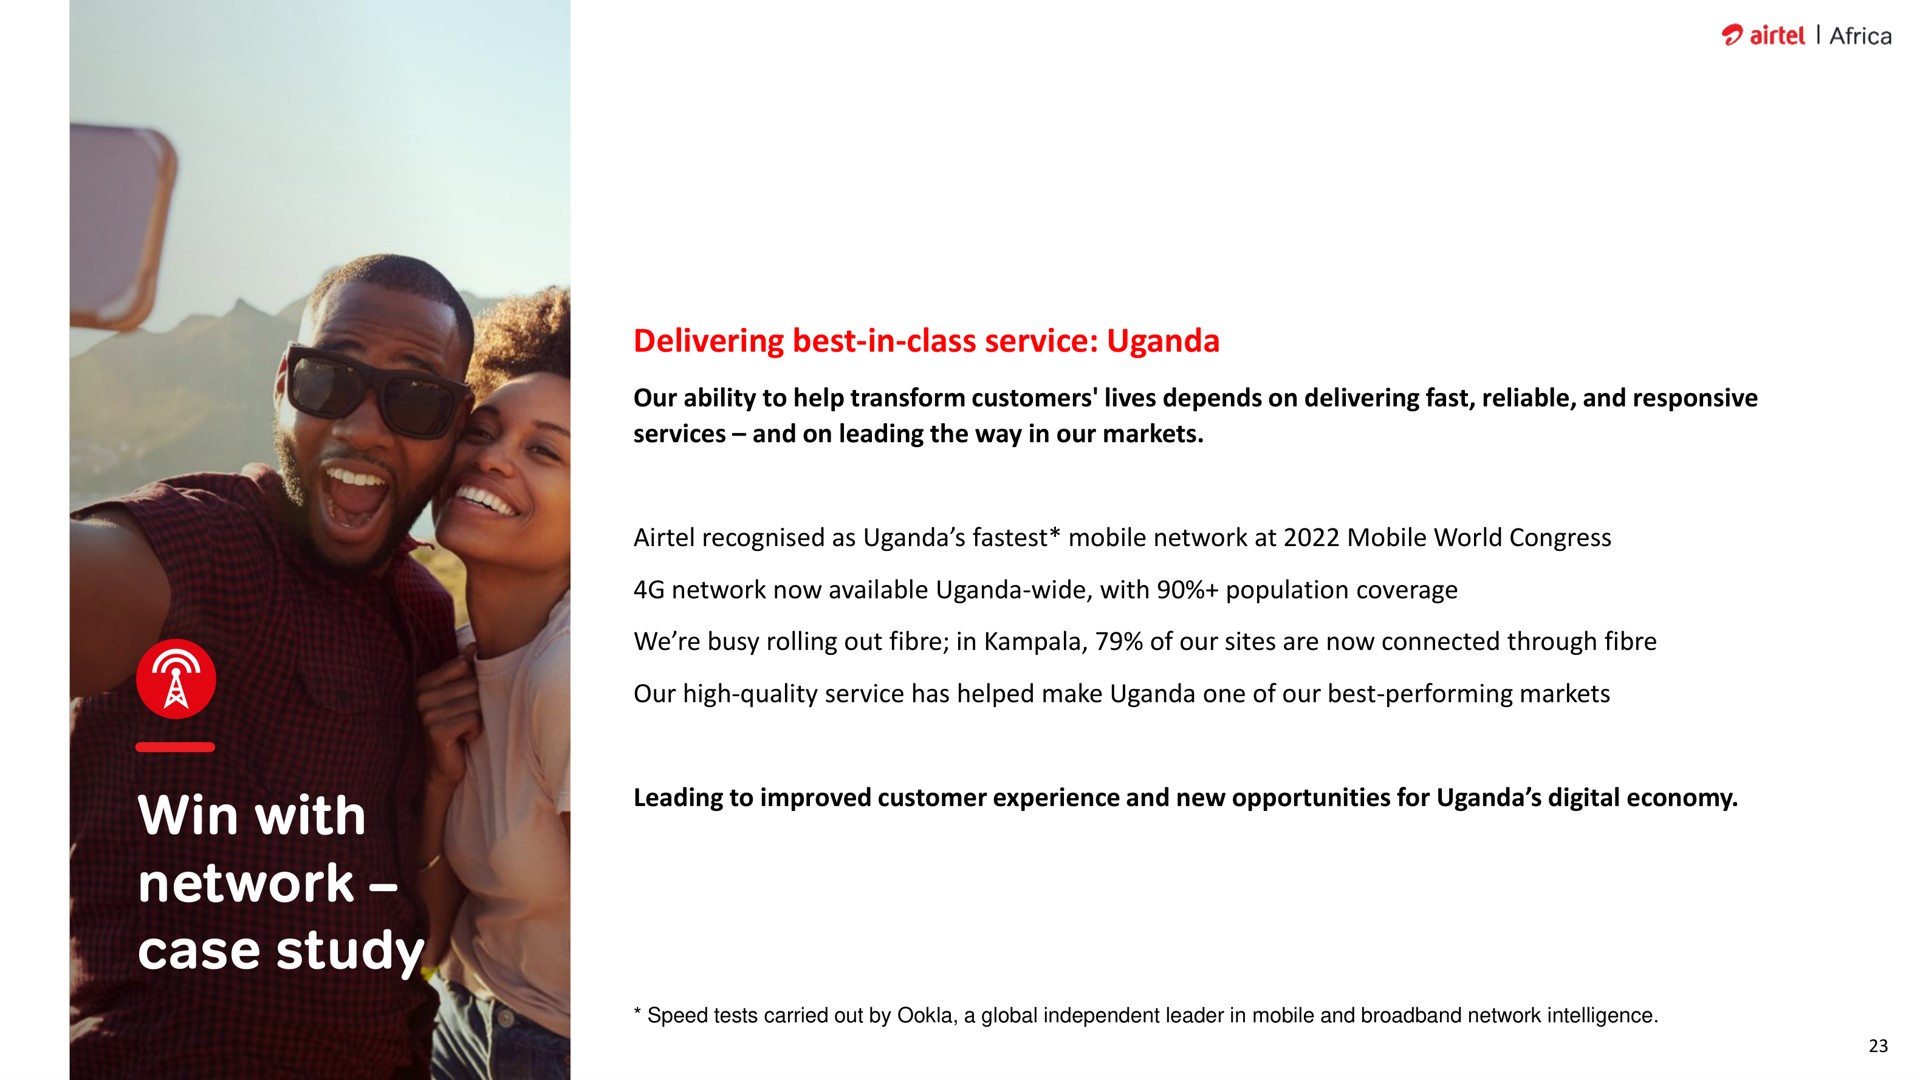 win with network case study delivering best in class service | Airtel Africa